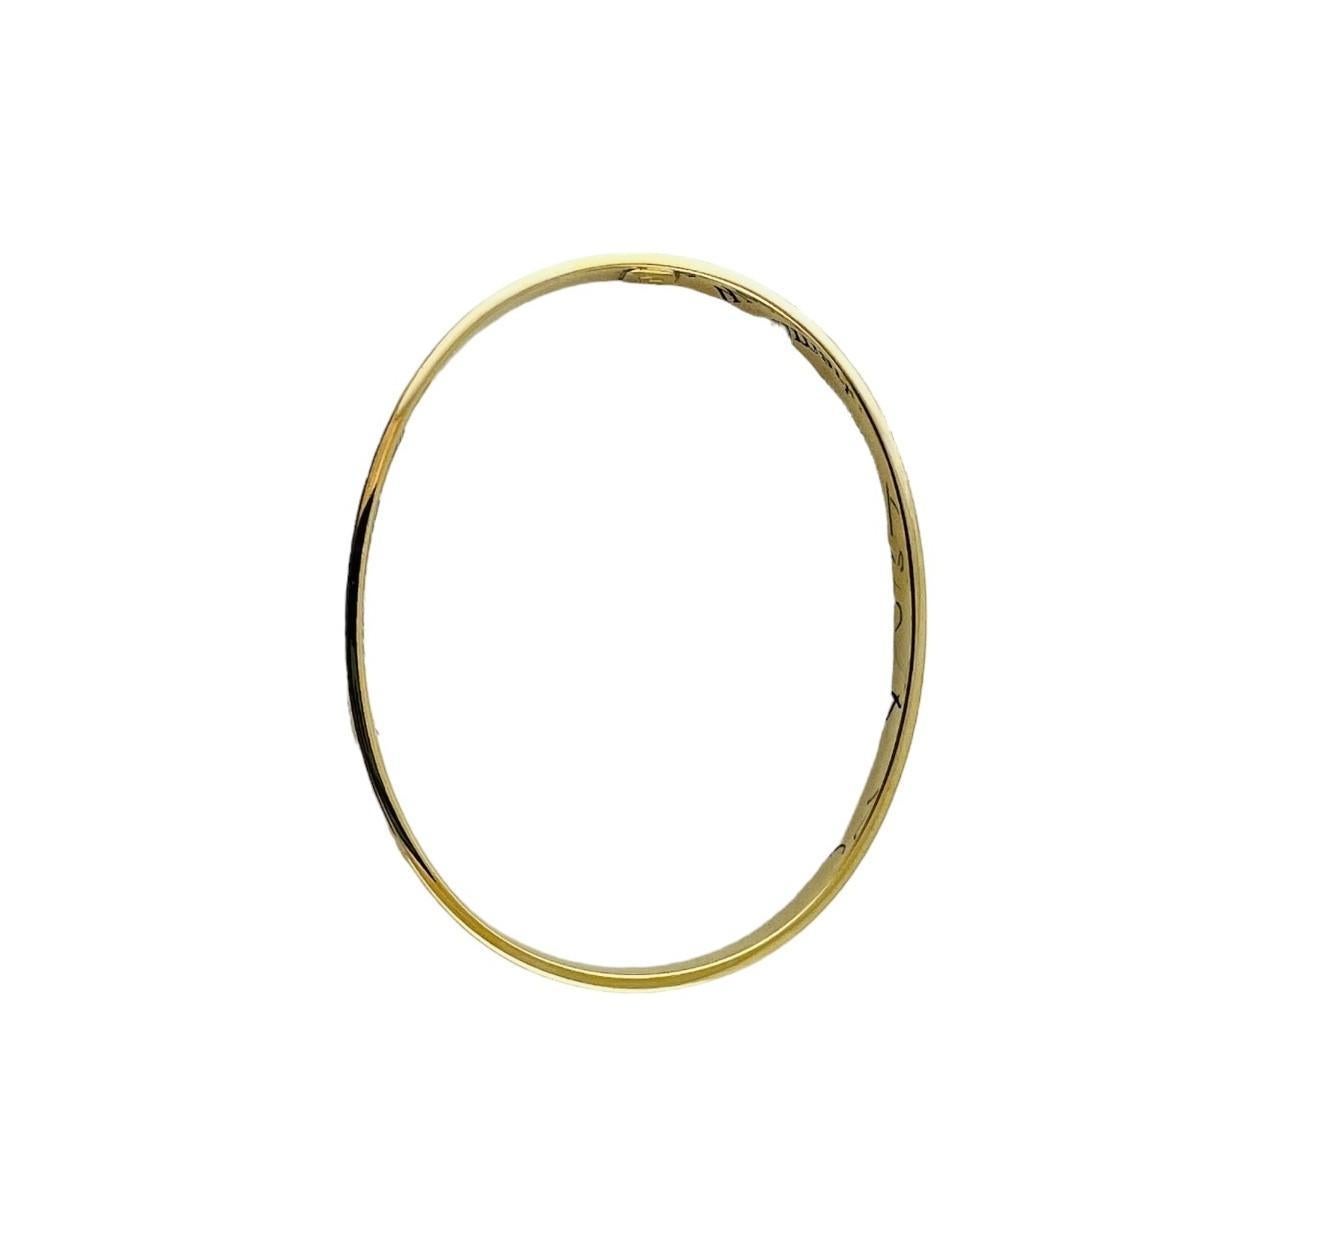 Tiffany & Co. 18K Yellow Gold Oval Bangle Bracelet

This oval Tiffany bangle bracelet is perfect for wearing alone or layered with other bangles

7.5